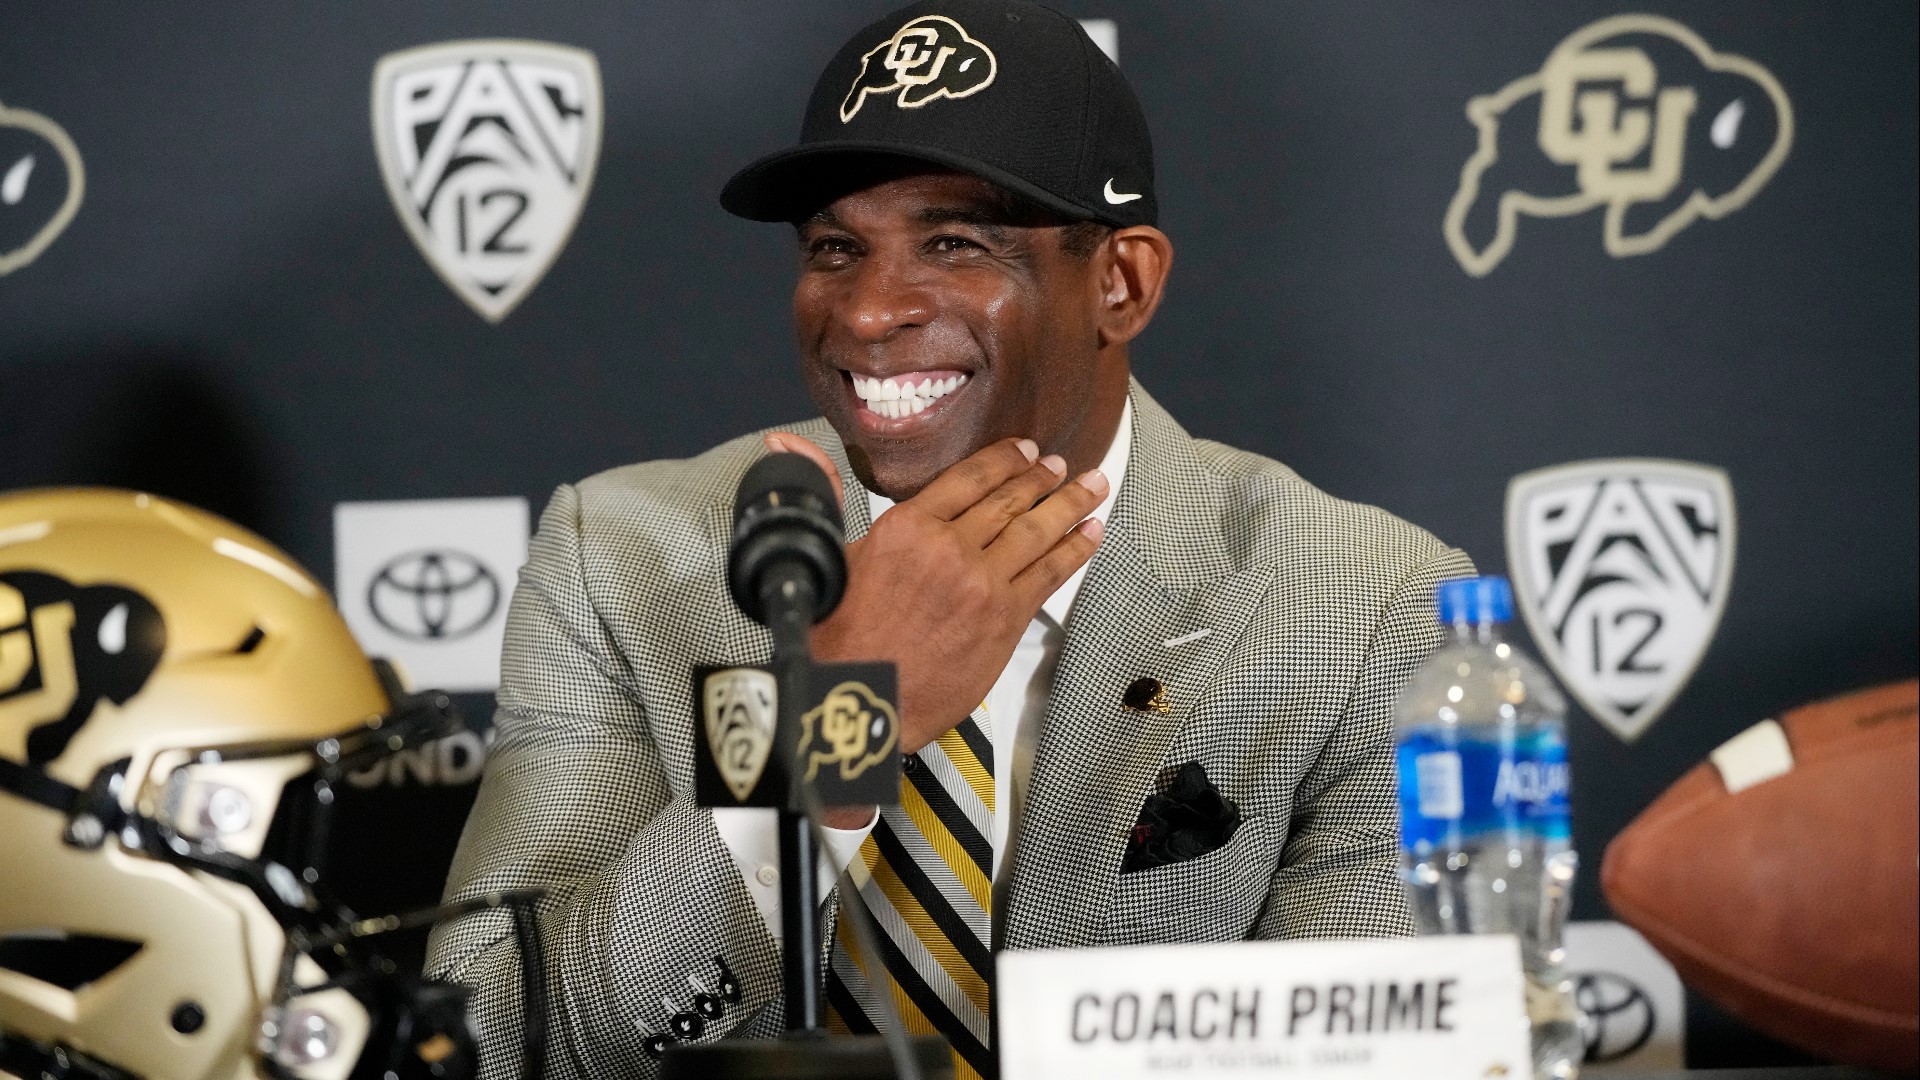 The Atlanta sports icon is currently the head football coach at the University of Colorado.